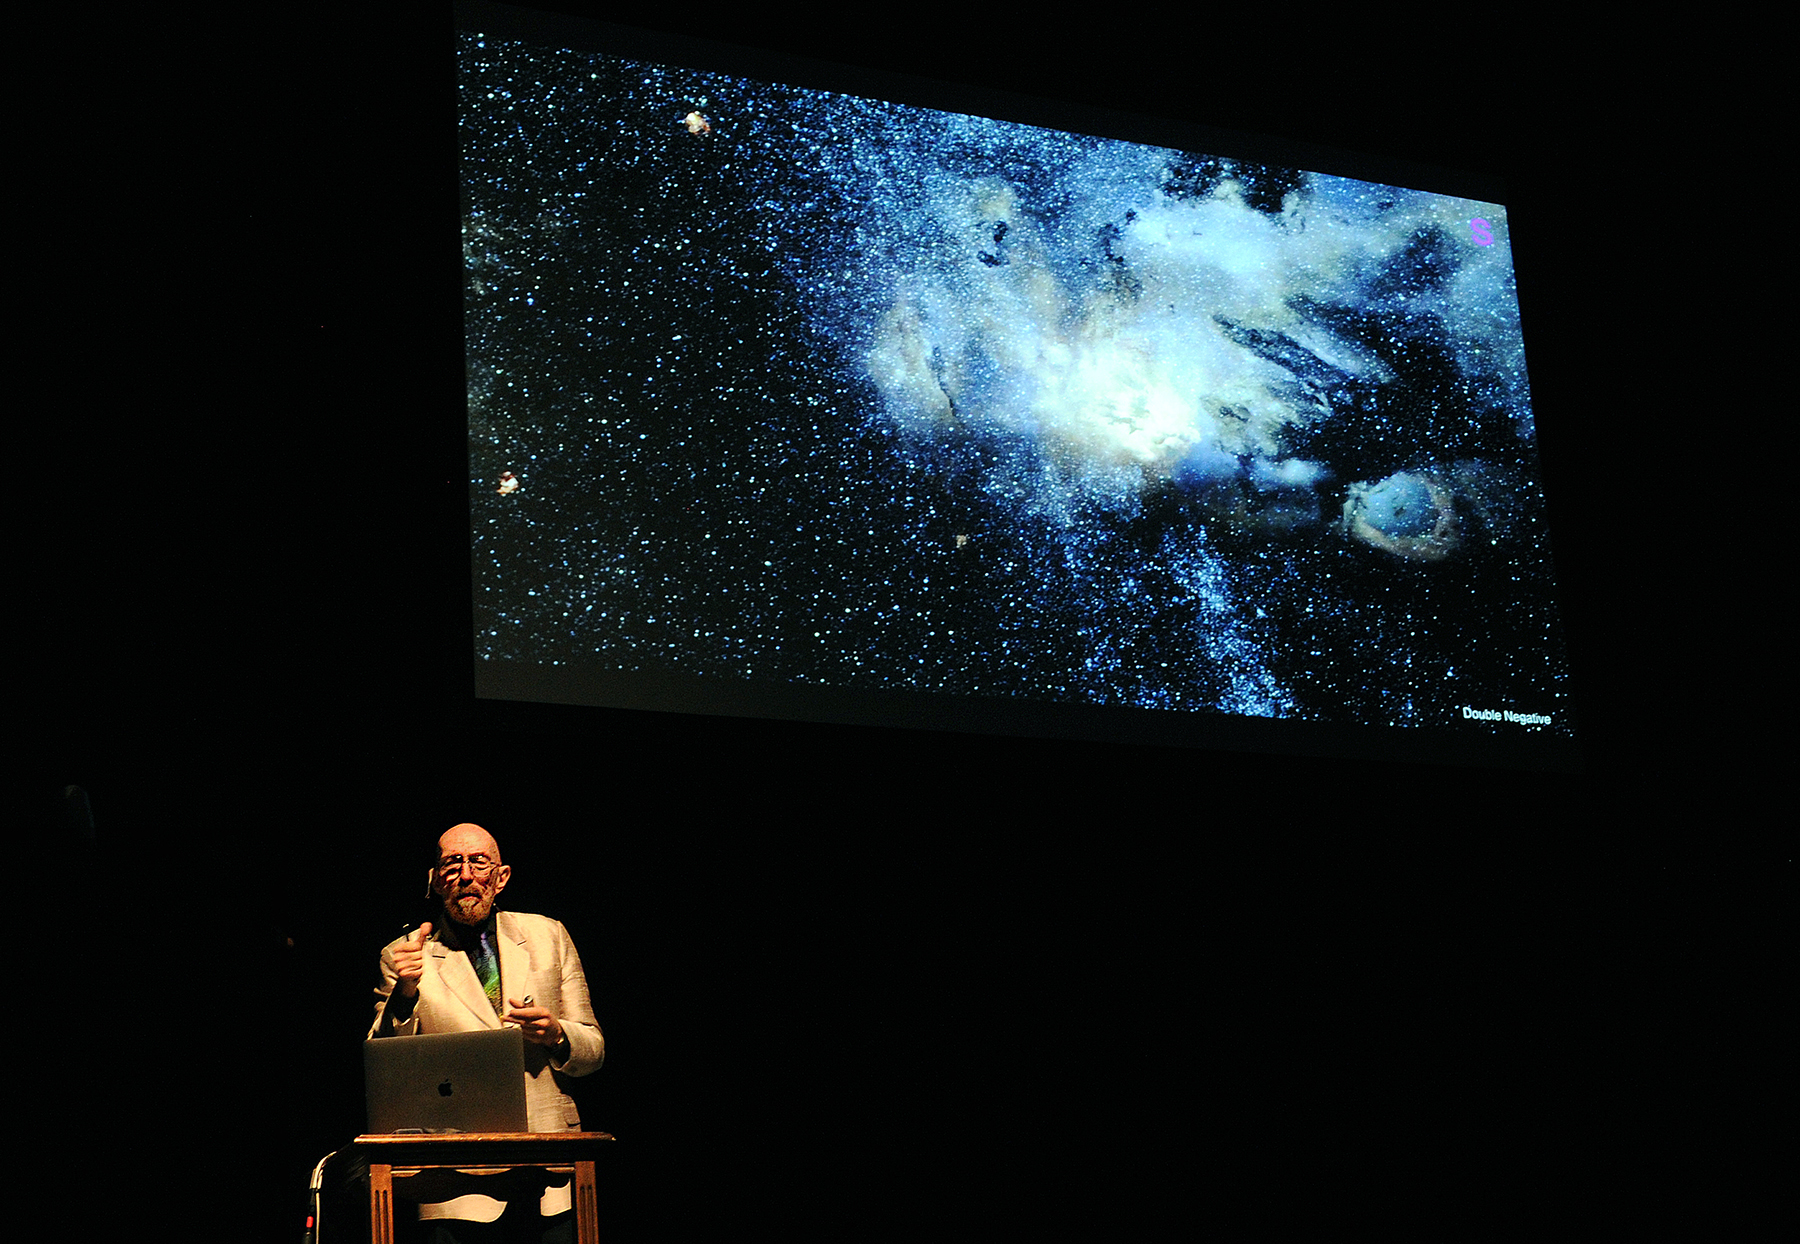 Frey lecturer Kip Thorne discussed his romance with the "warped side of the universe." (photo by Donn Young) In this photo Thorne stands in front o the audience with a big screen in the background with a picture of some of these phenomena like black holes, worm holes, etc.